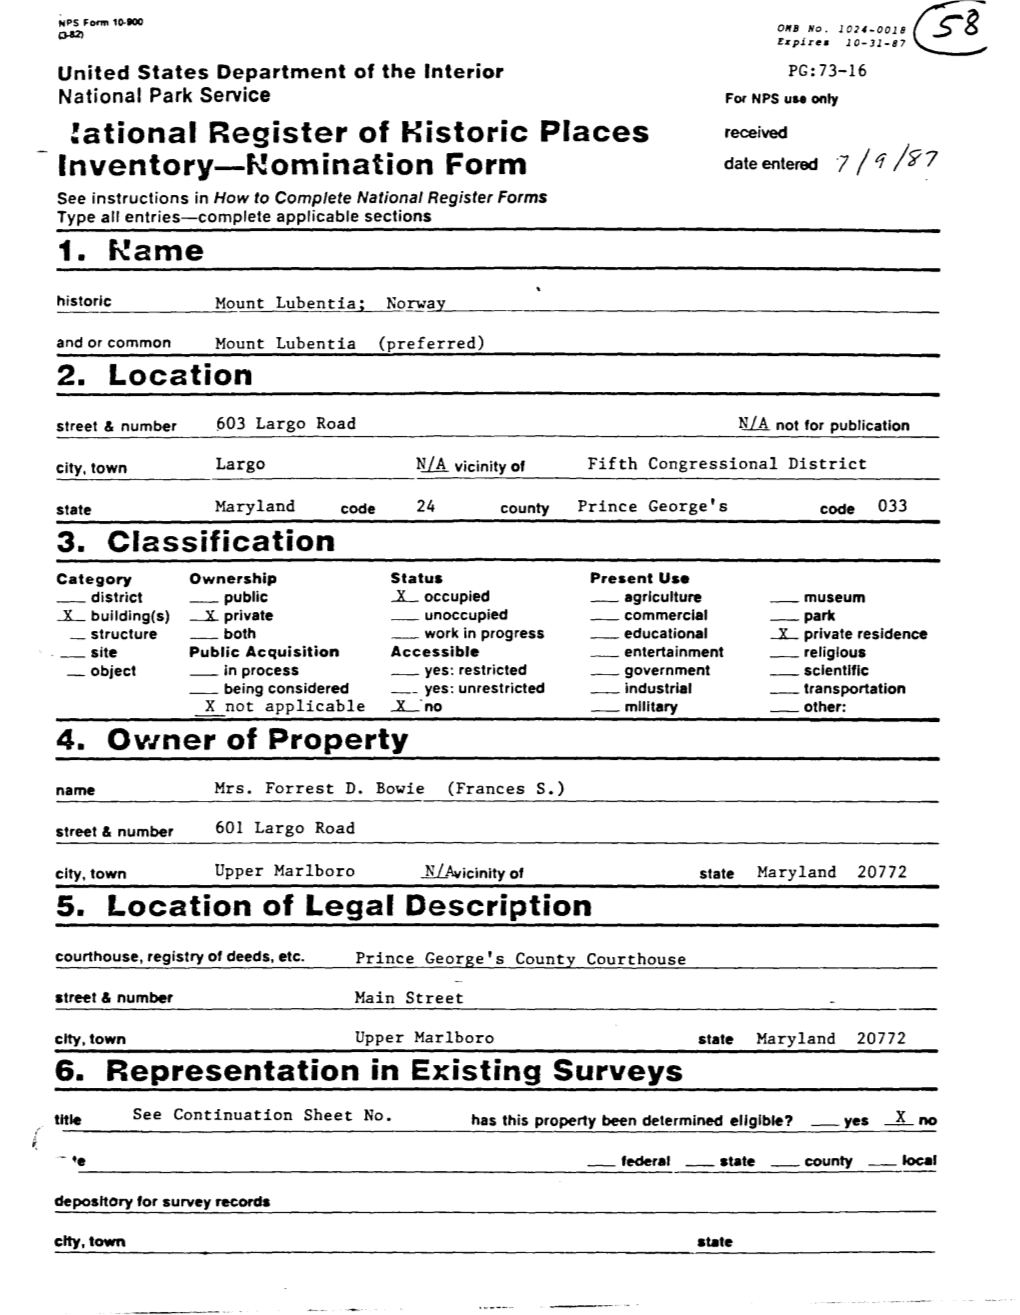 !Ational Register of Historic Places Inventory-Nomination Form 1. F.!Ame 2. Location 3. Classification 4. Ov.Rner of Property 5